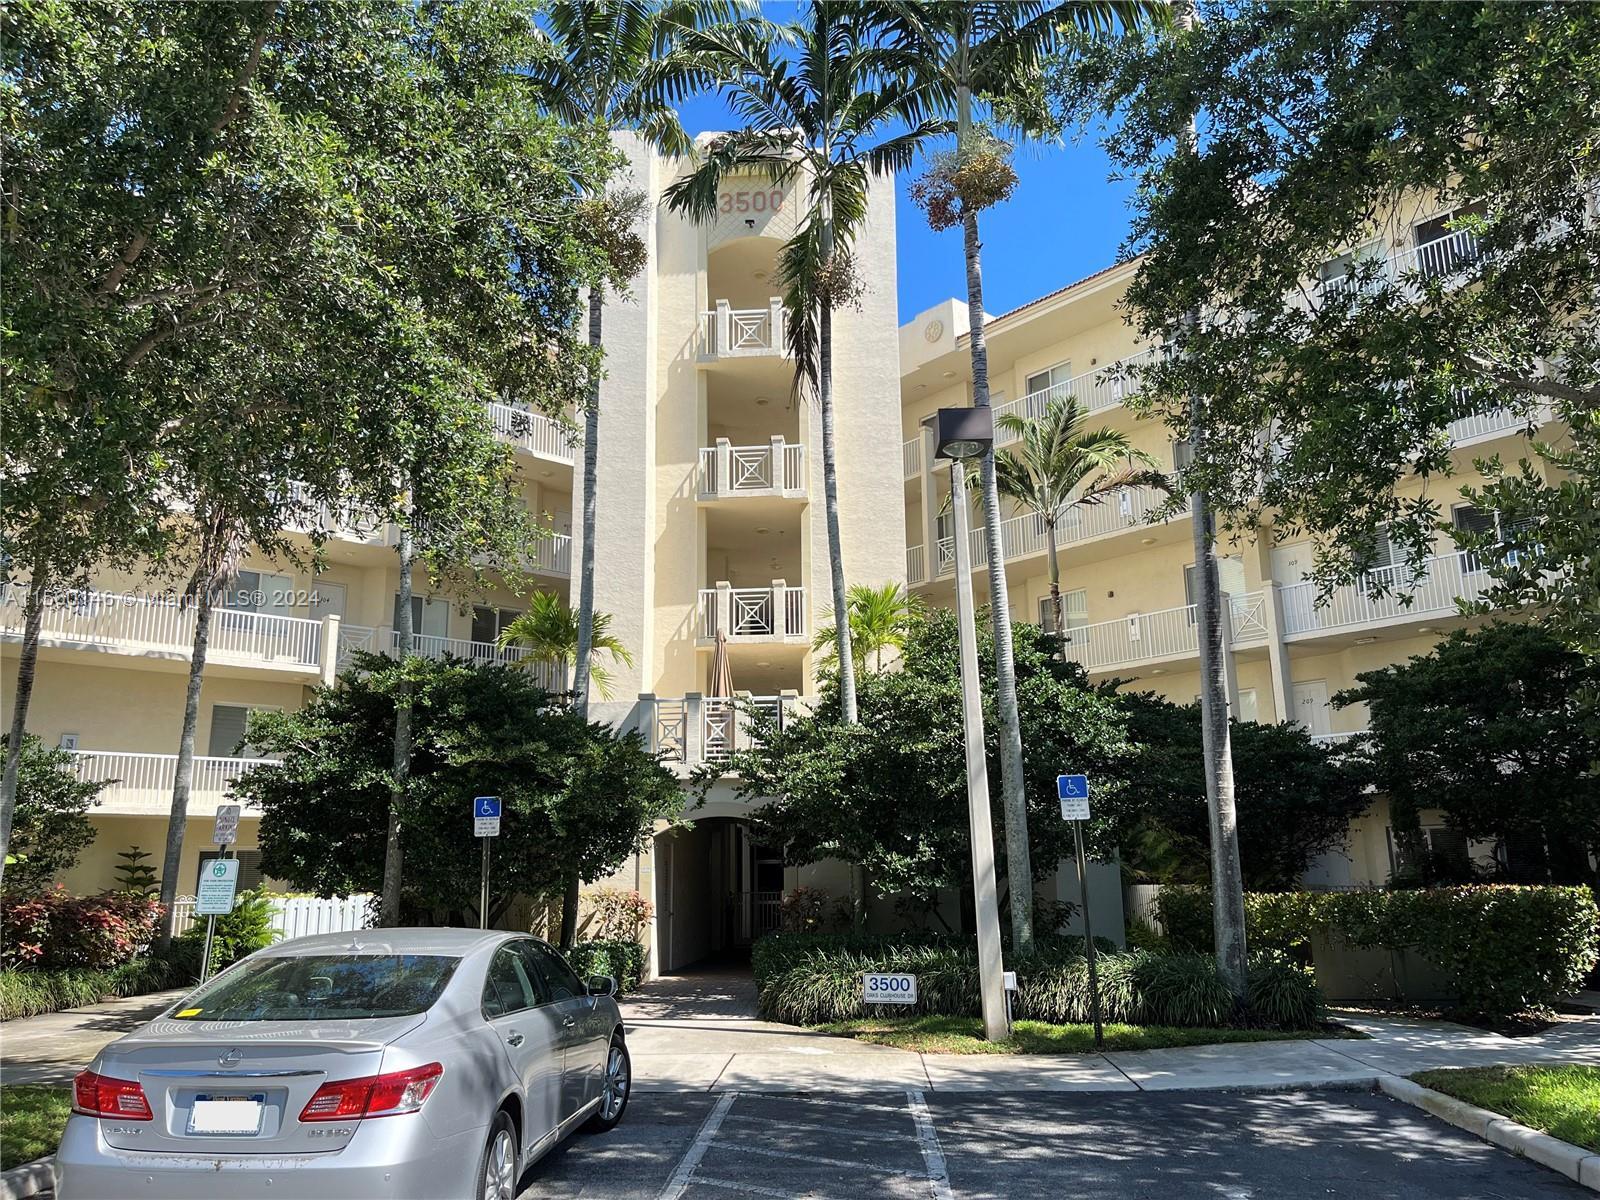 Photo of 3500 Oaks Clubhouse Dr #308 in Pompano Beach, FL